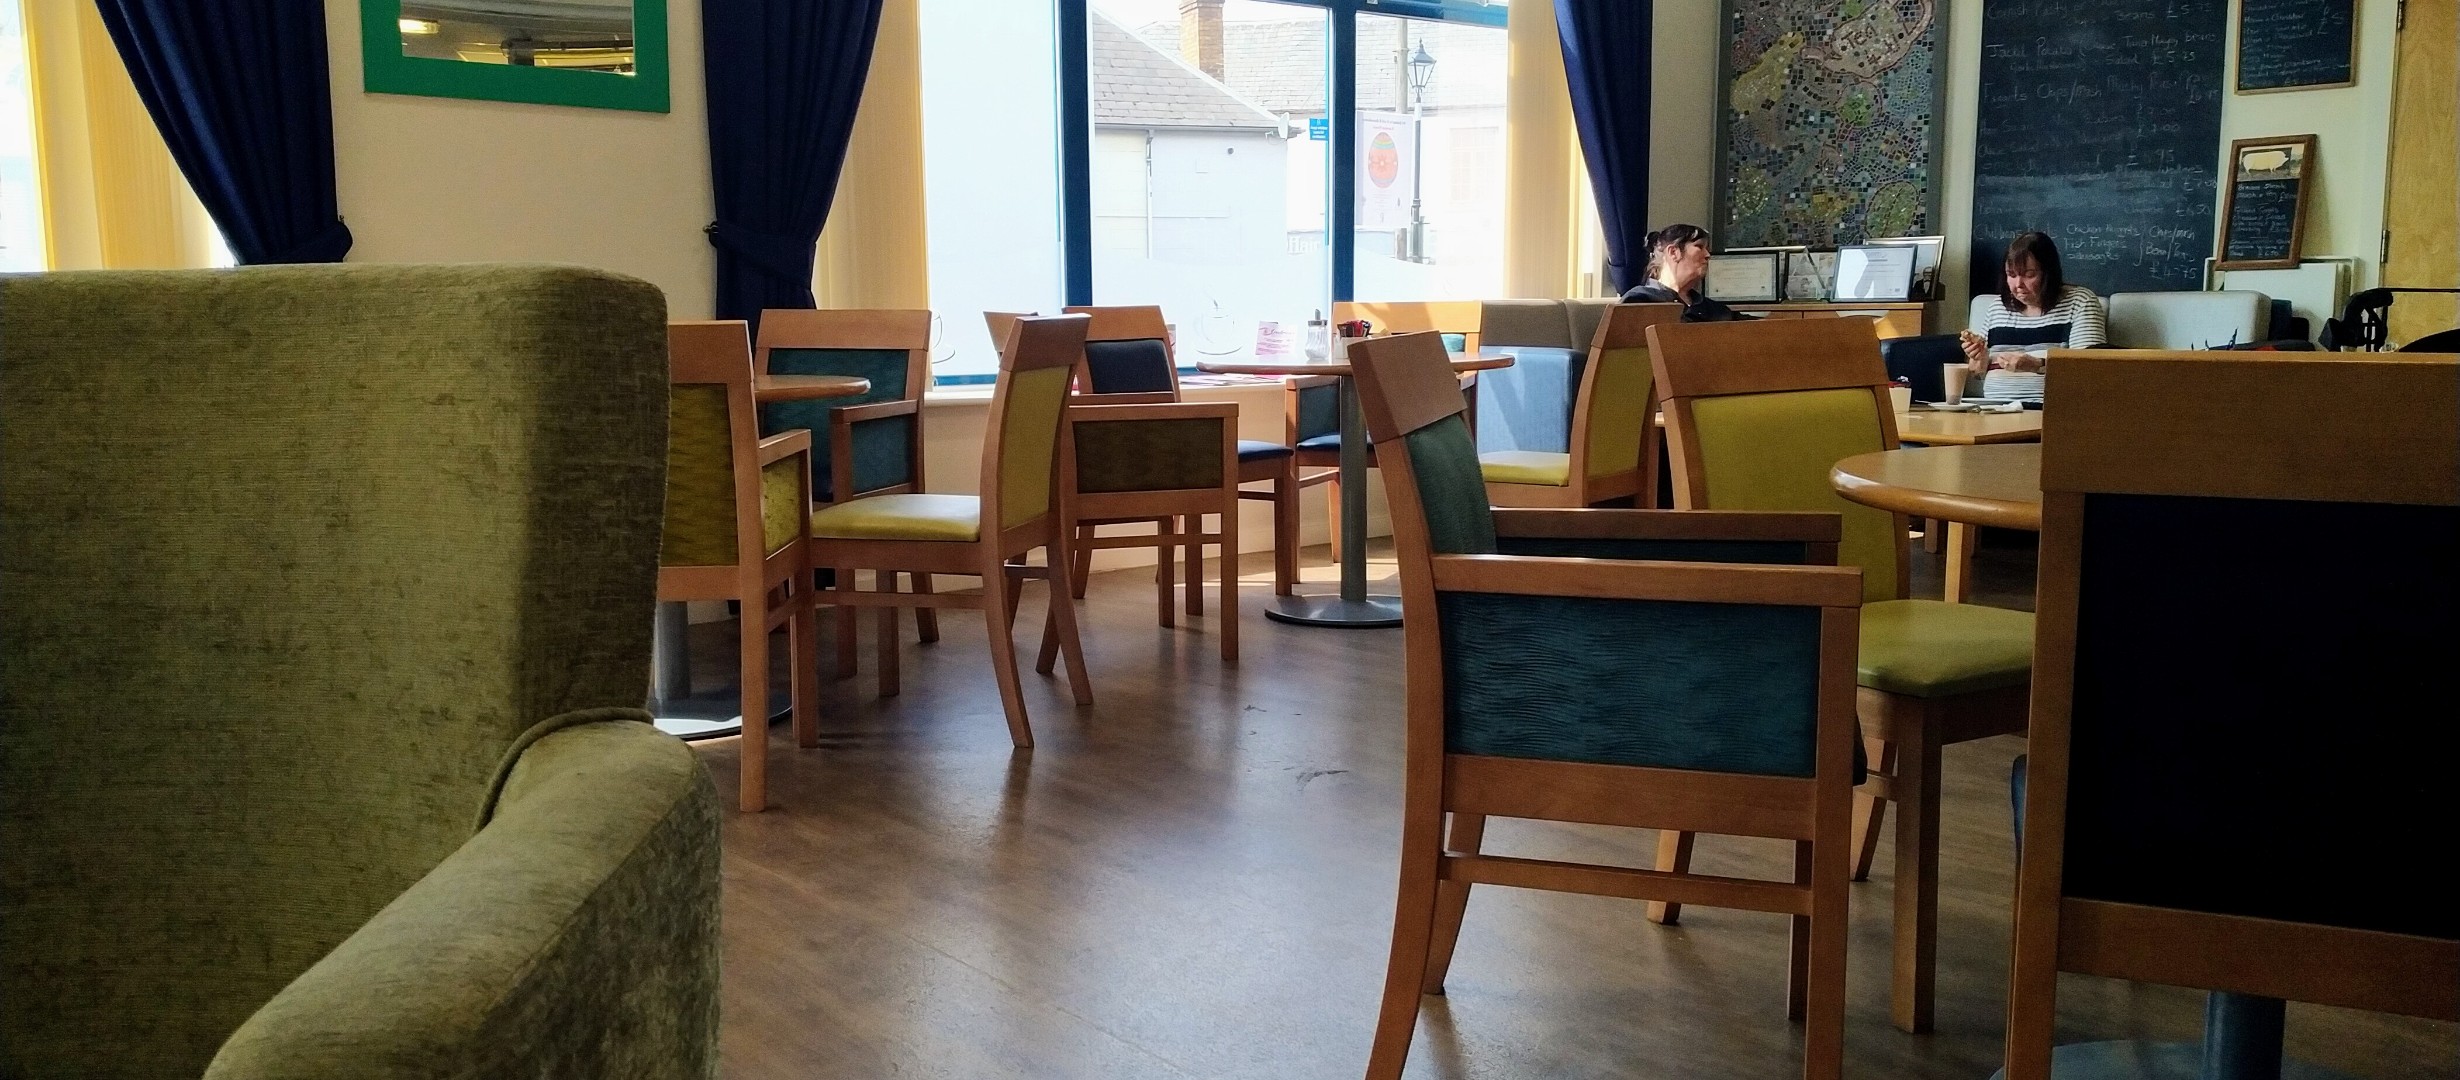 A picture of the inside of the cafe. Lino floors, easy to arrange chairs